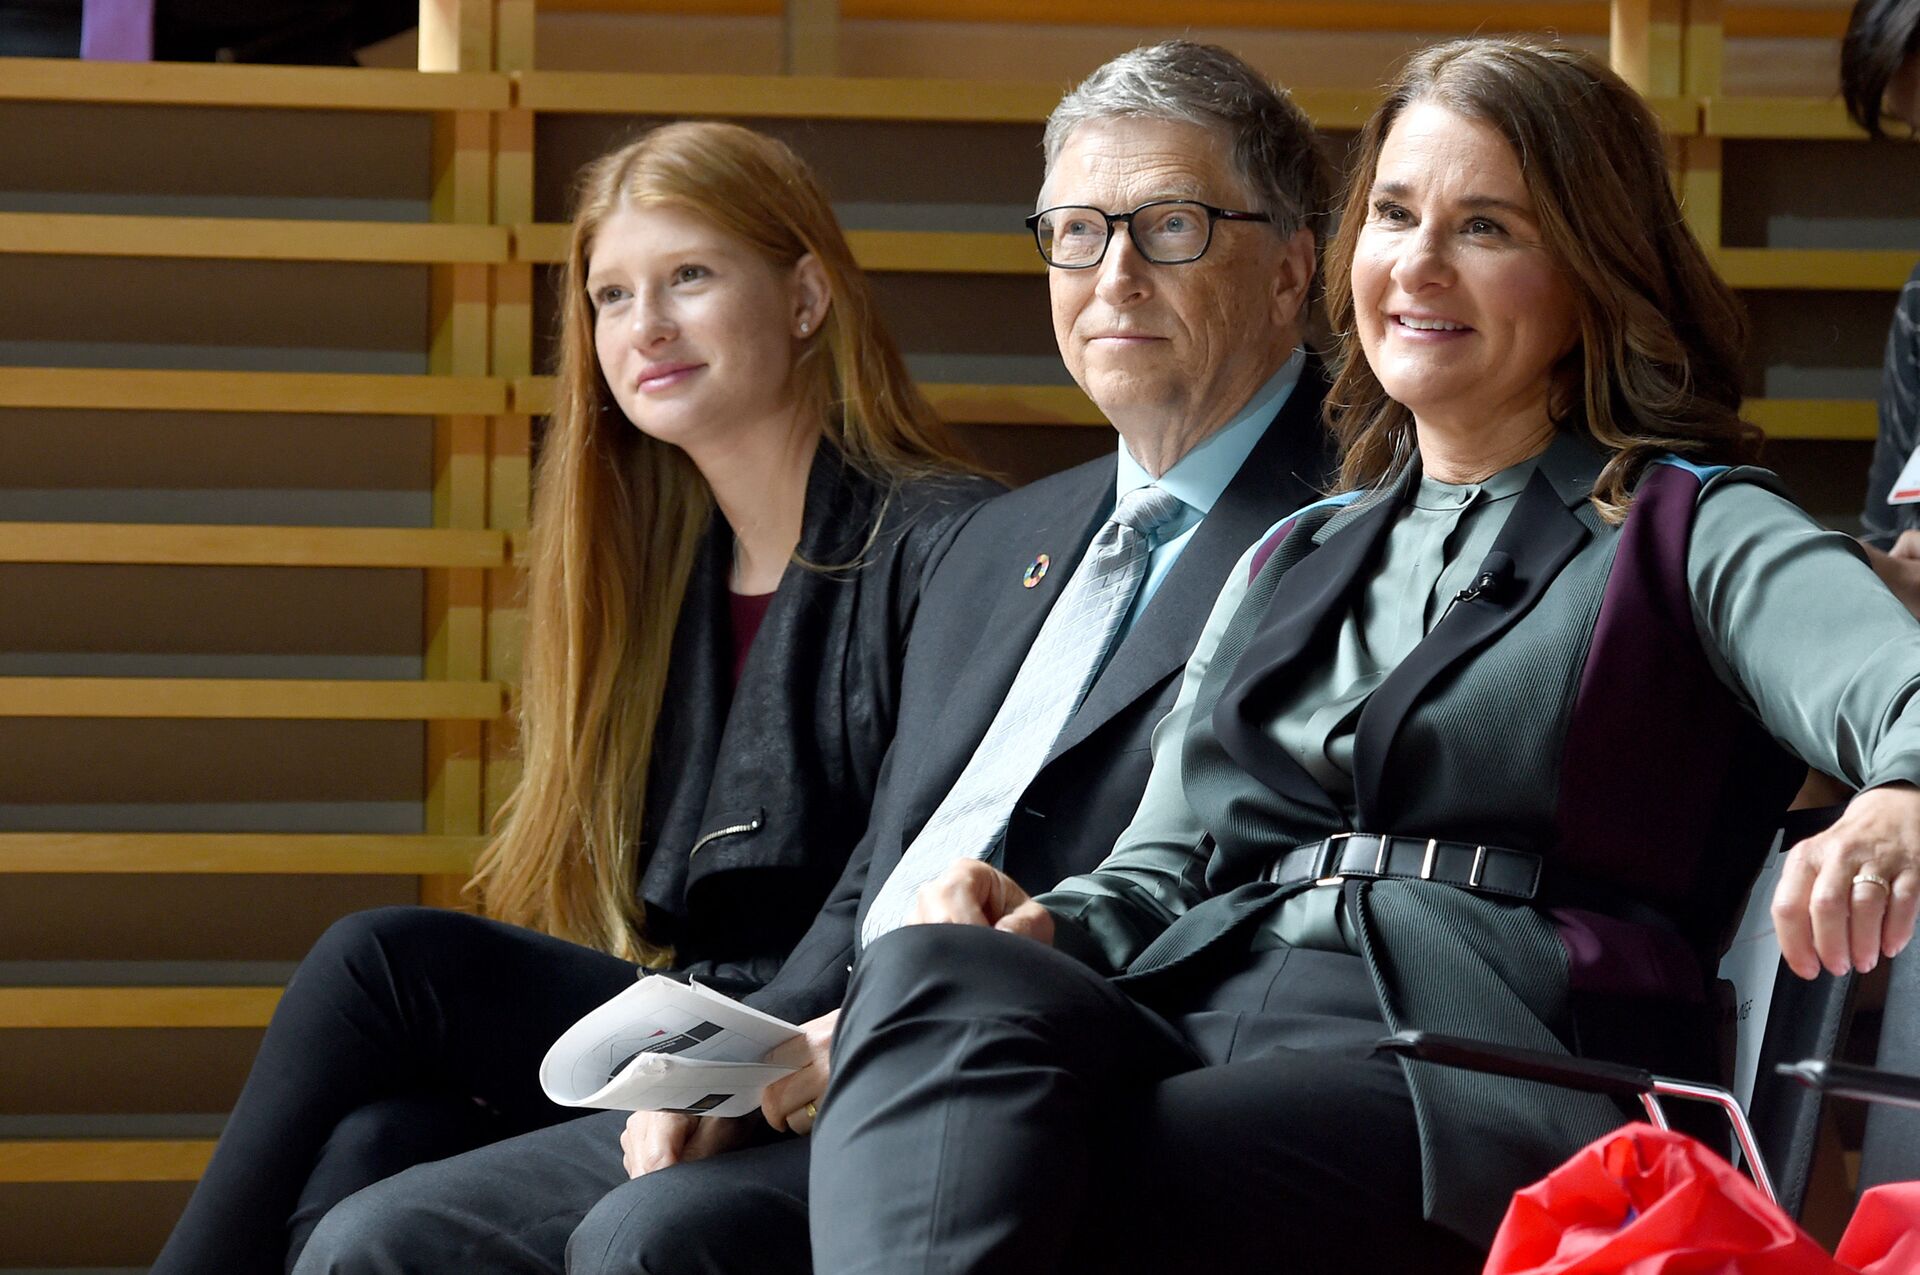 There's 'Big Question' Over Real Reason for Bill and Melinda Gates' Divorce, UK Lawyer Claims - Sputnik International, 1920, 05.06.2021